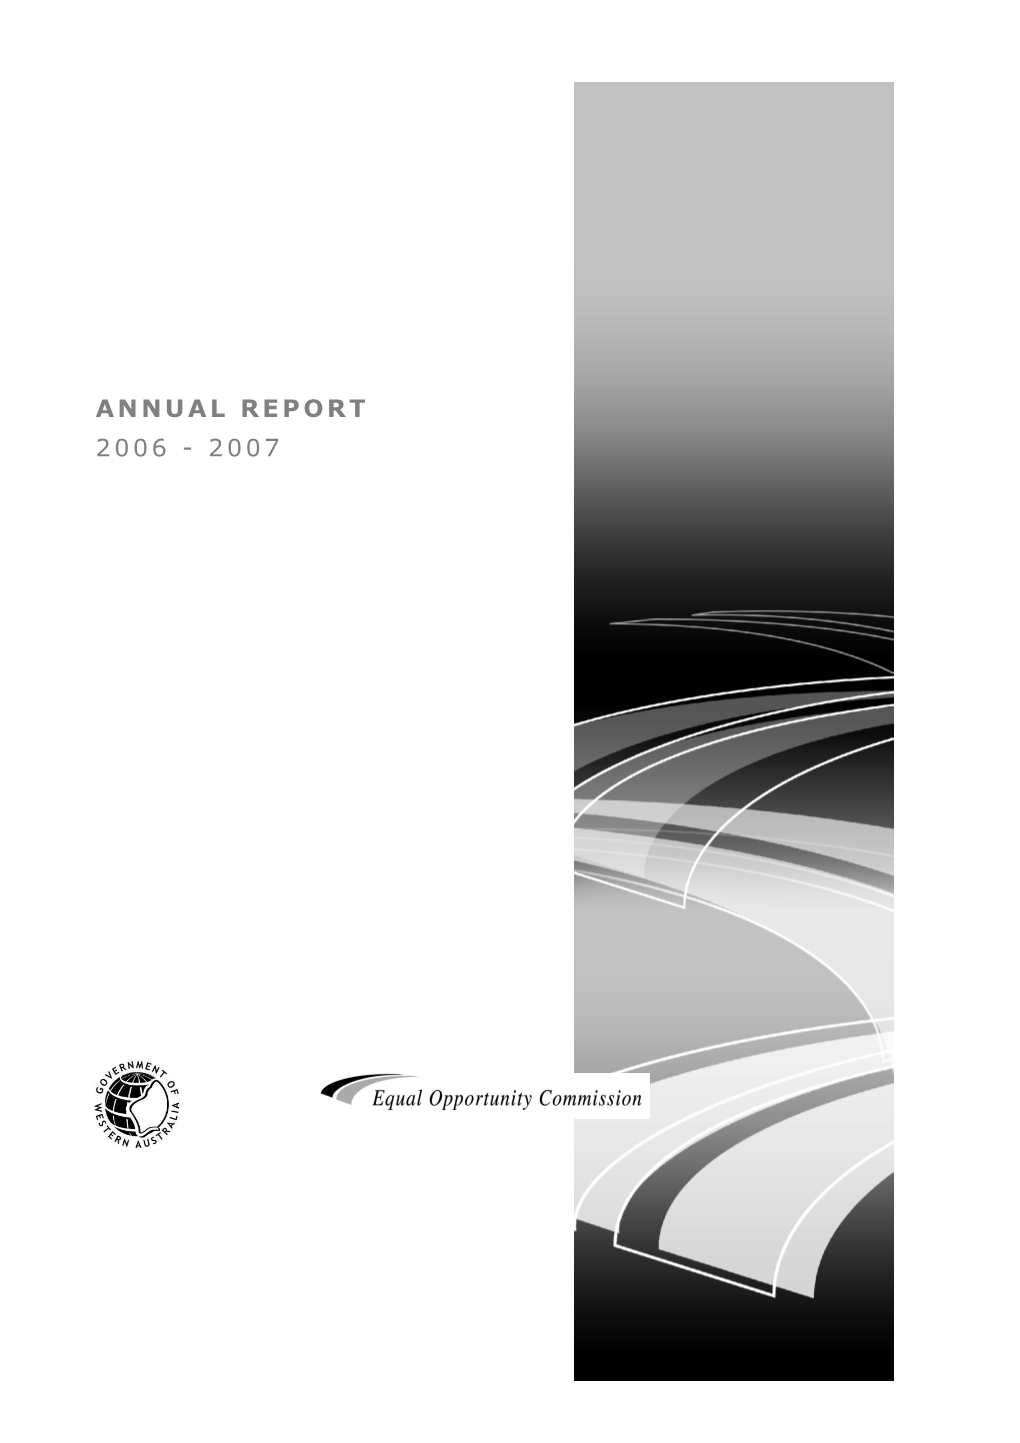 SUGGESTED ANNUAL REPORT STRUCTURE (As Per Directive 903)